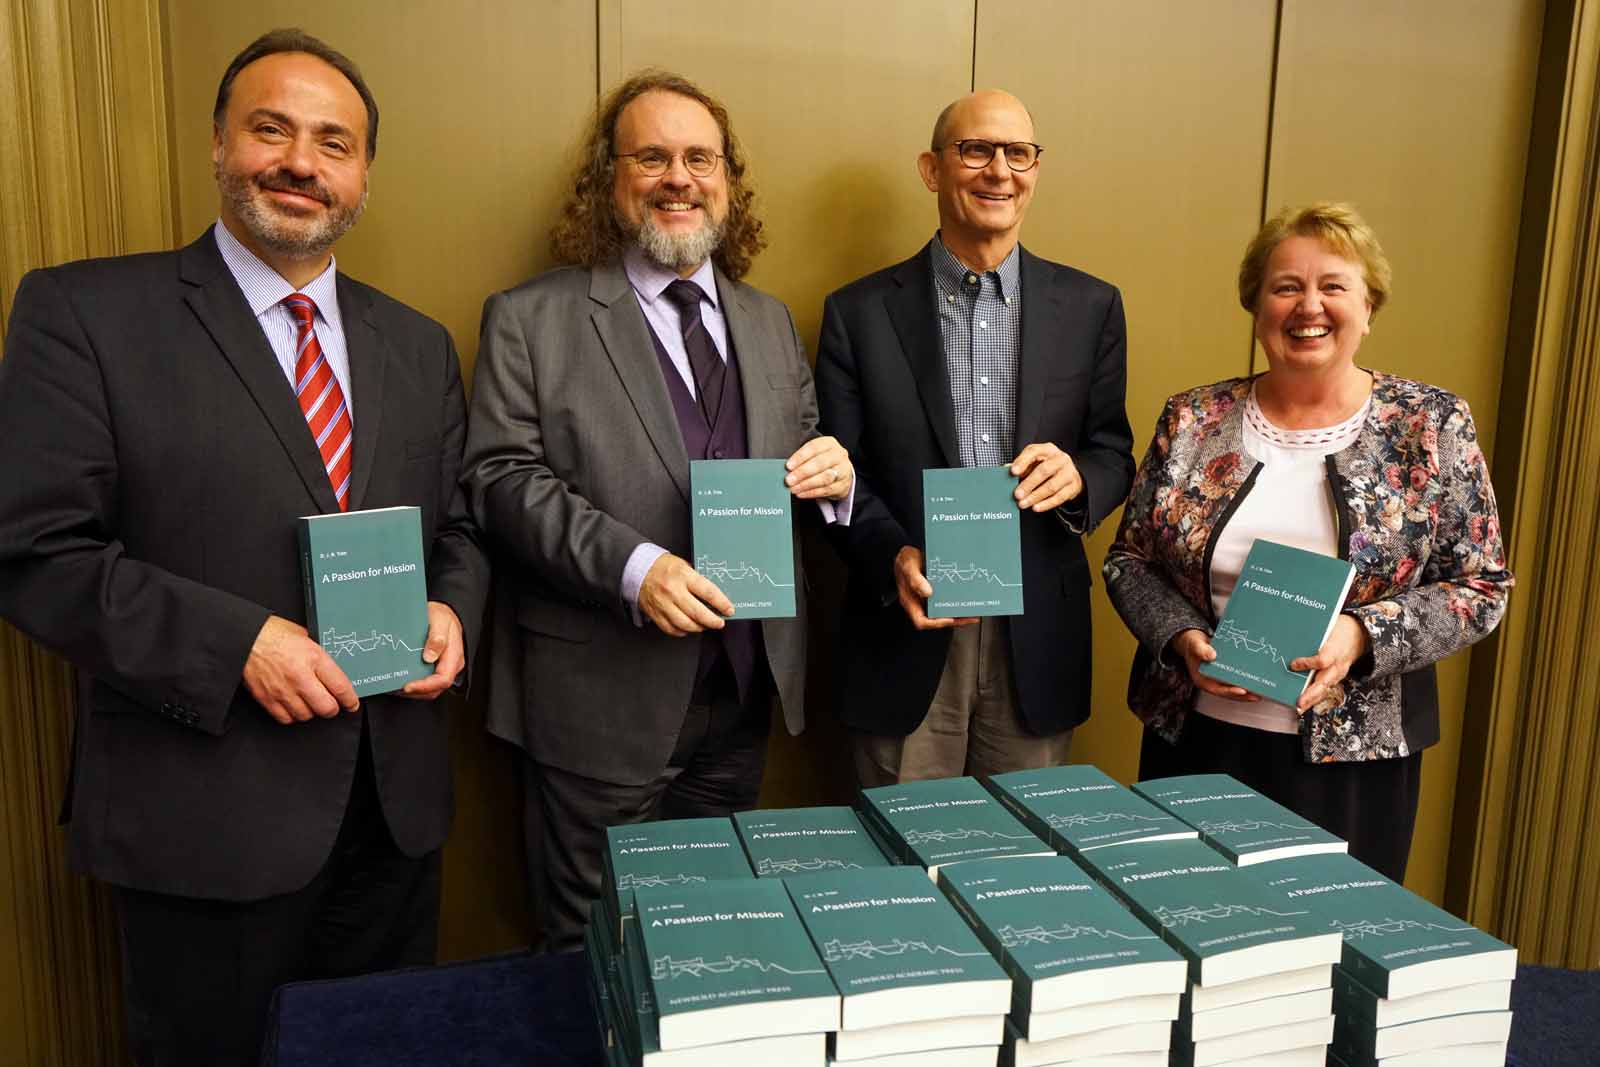 A Passion for Mission official book launch. From left to right, Trans-European Division (TED) president Raafat Kamal, Adventist author and historian David Trim, Adventist Church president Ted Wilson, and TED executive secretary Audrey Andersson. [Photo: Victor Hulbert, Trans-European Division News]